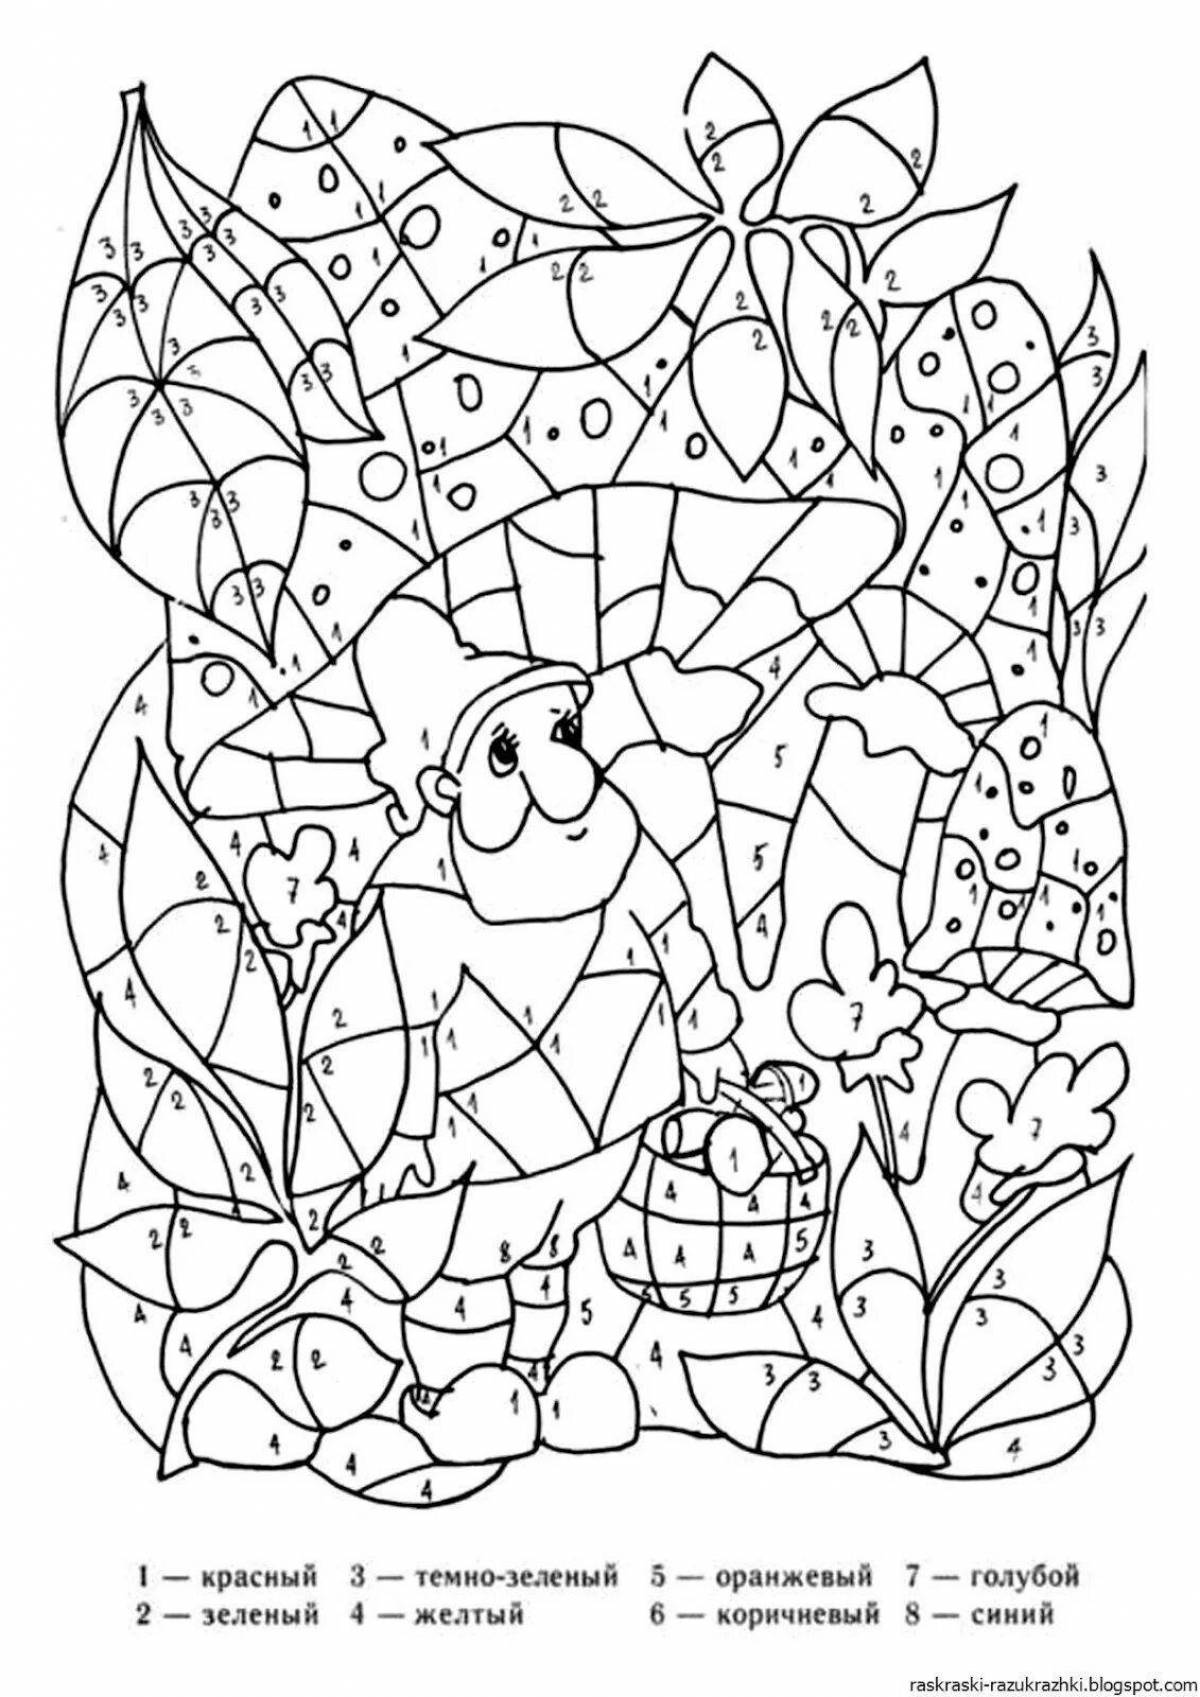 Colorful coloring book for children aged 8-9 with examples by numbers